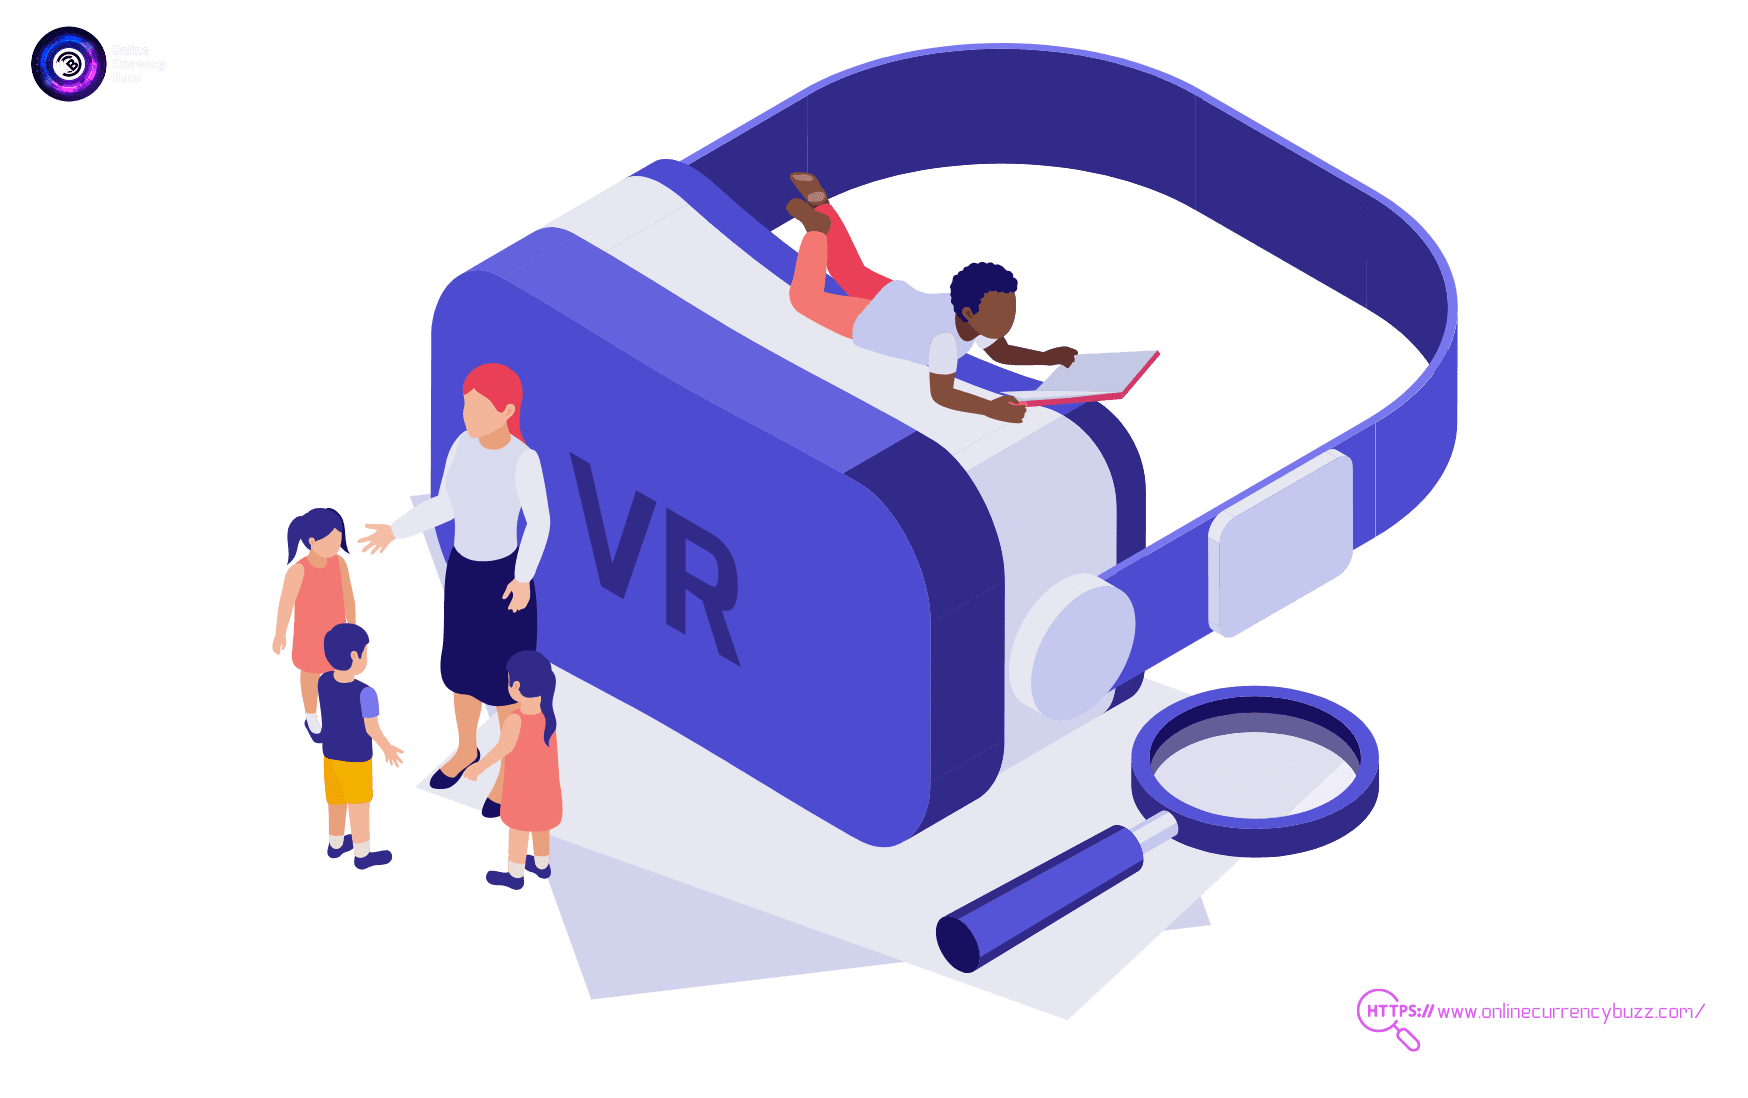 What Is Virtual Reality?